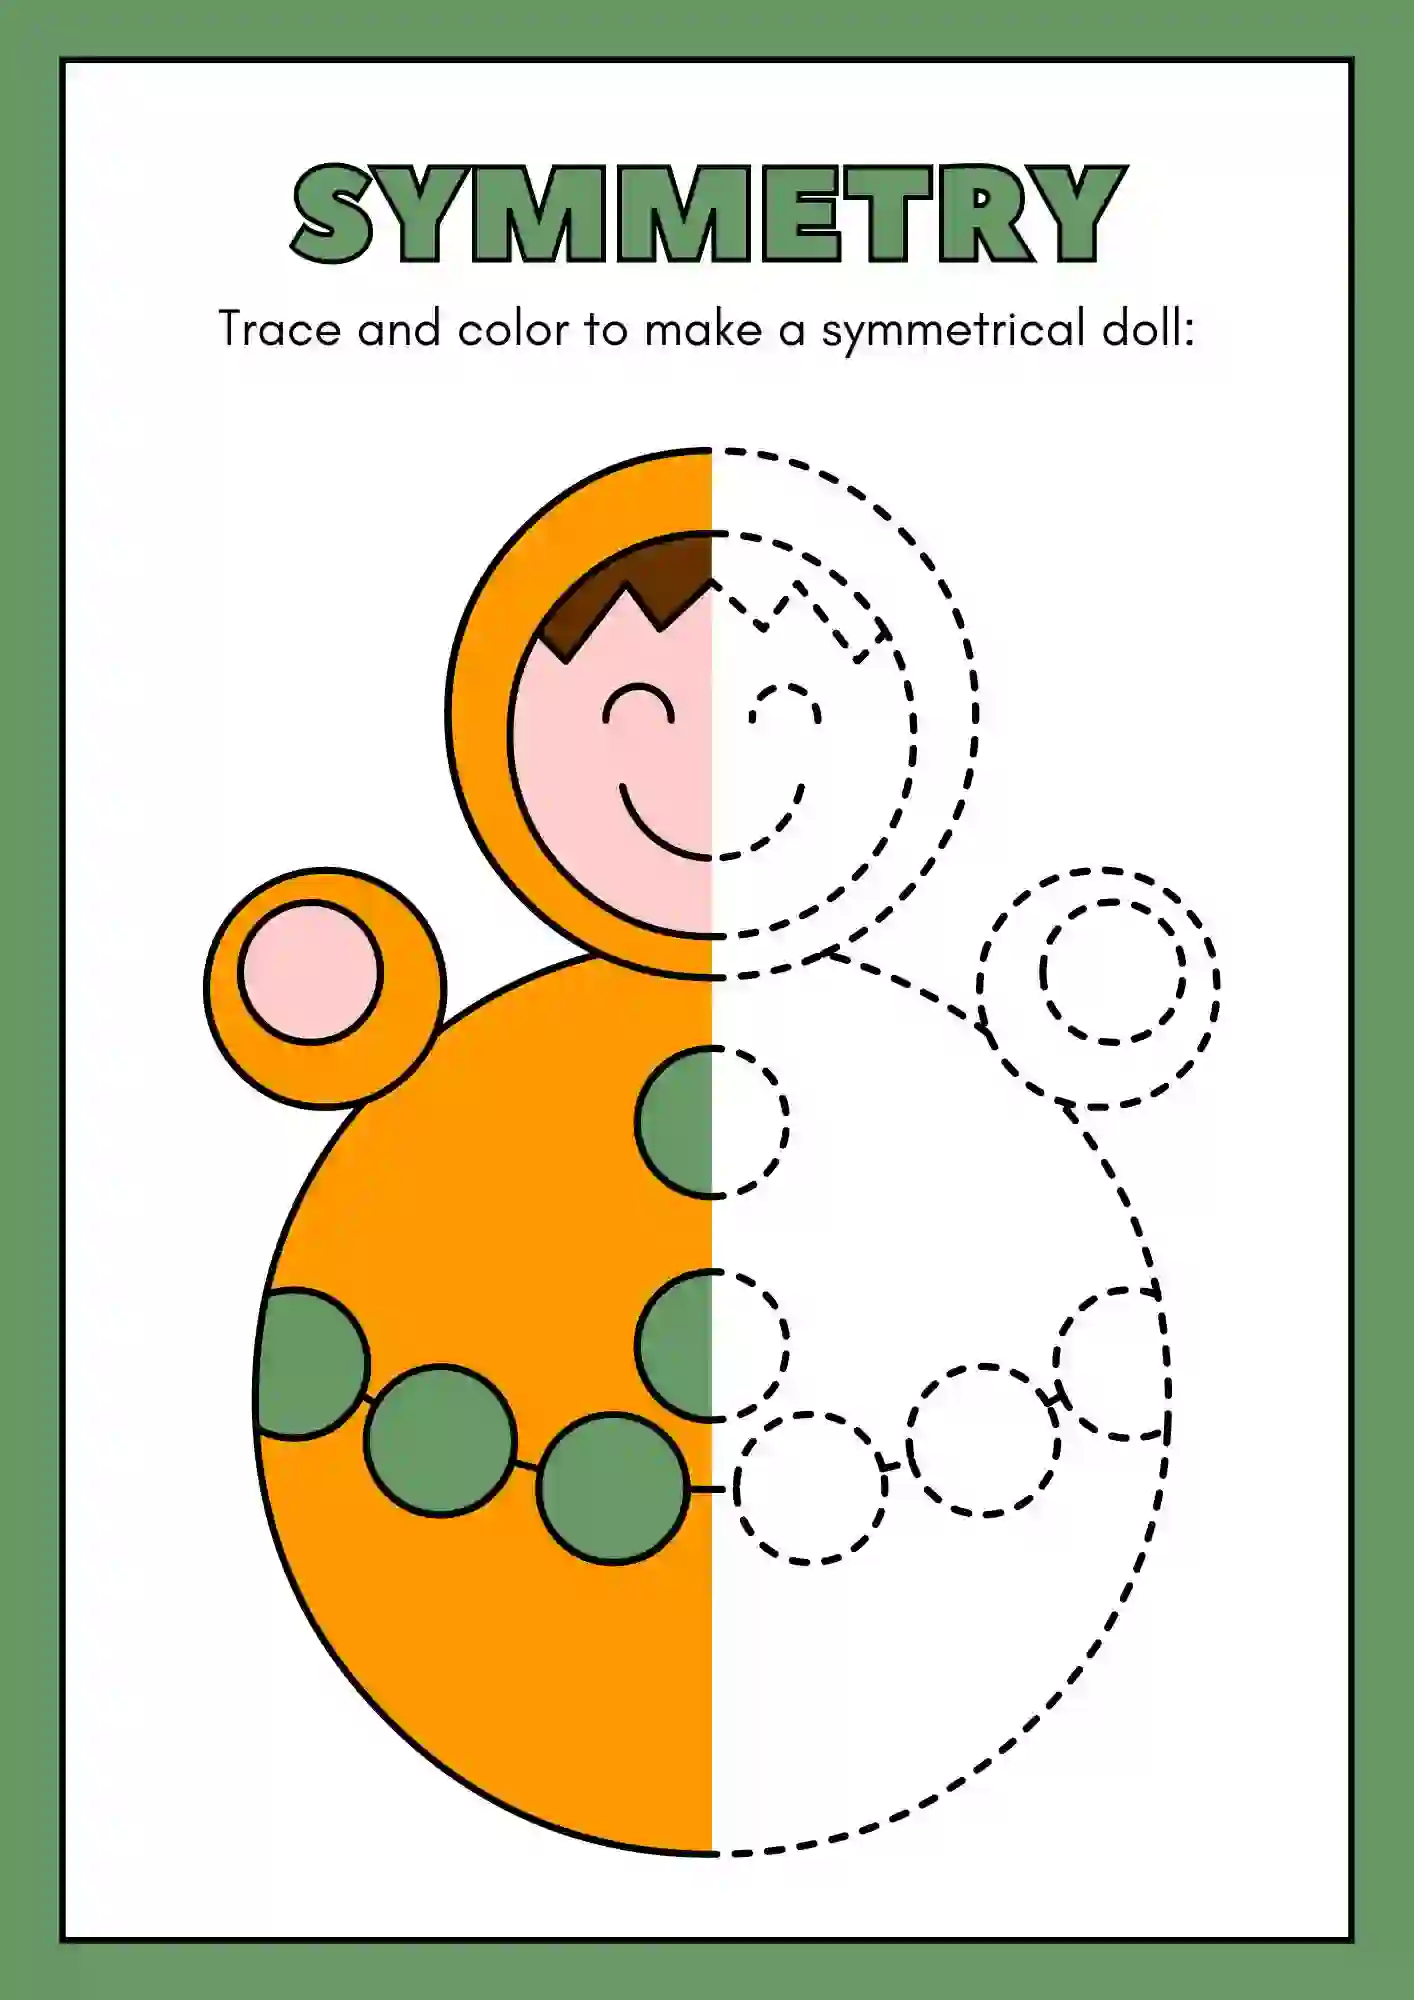 Symmetric Drawing and Coloring worksheets (doll)